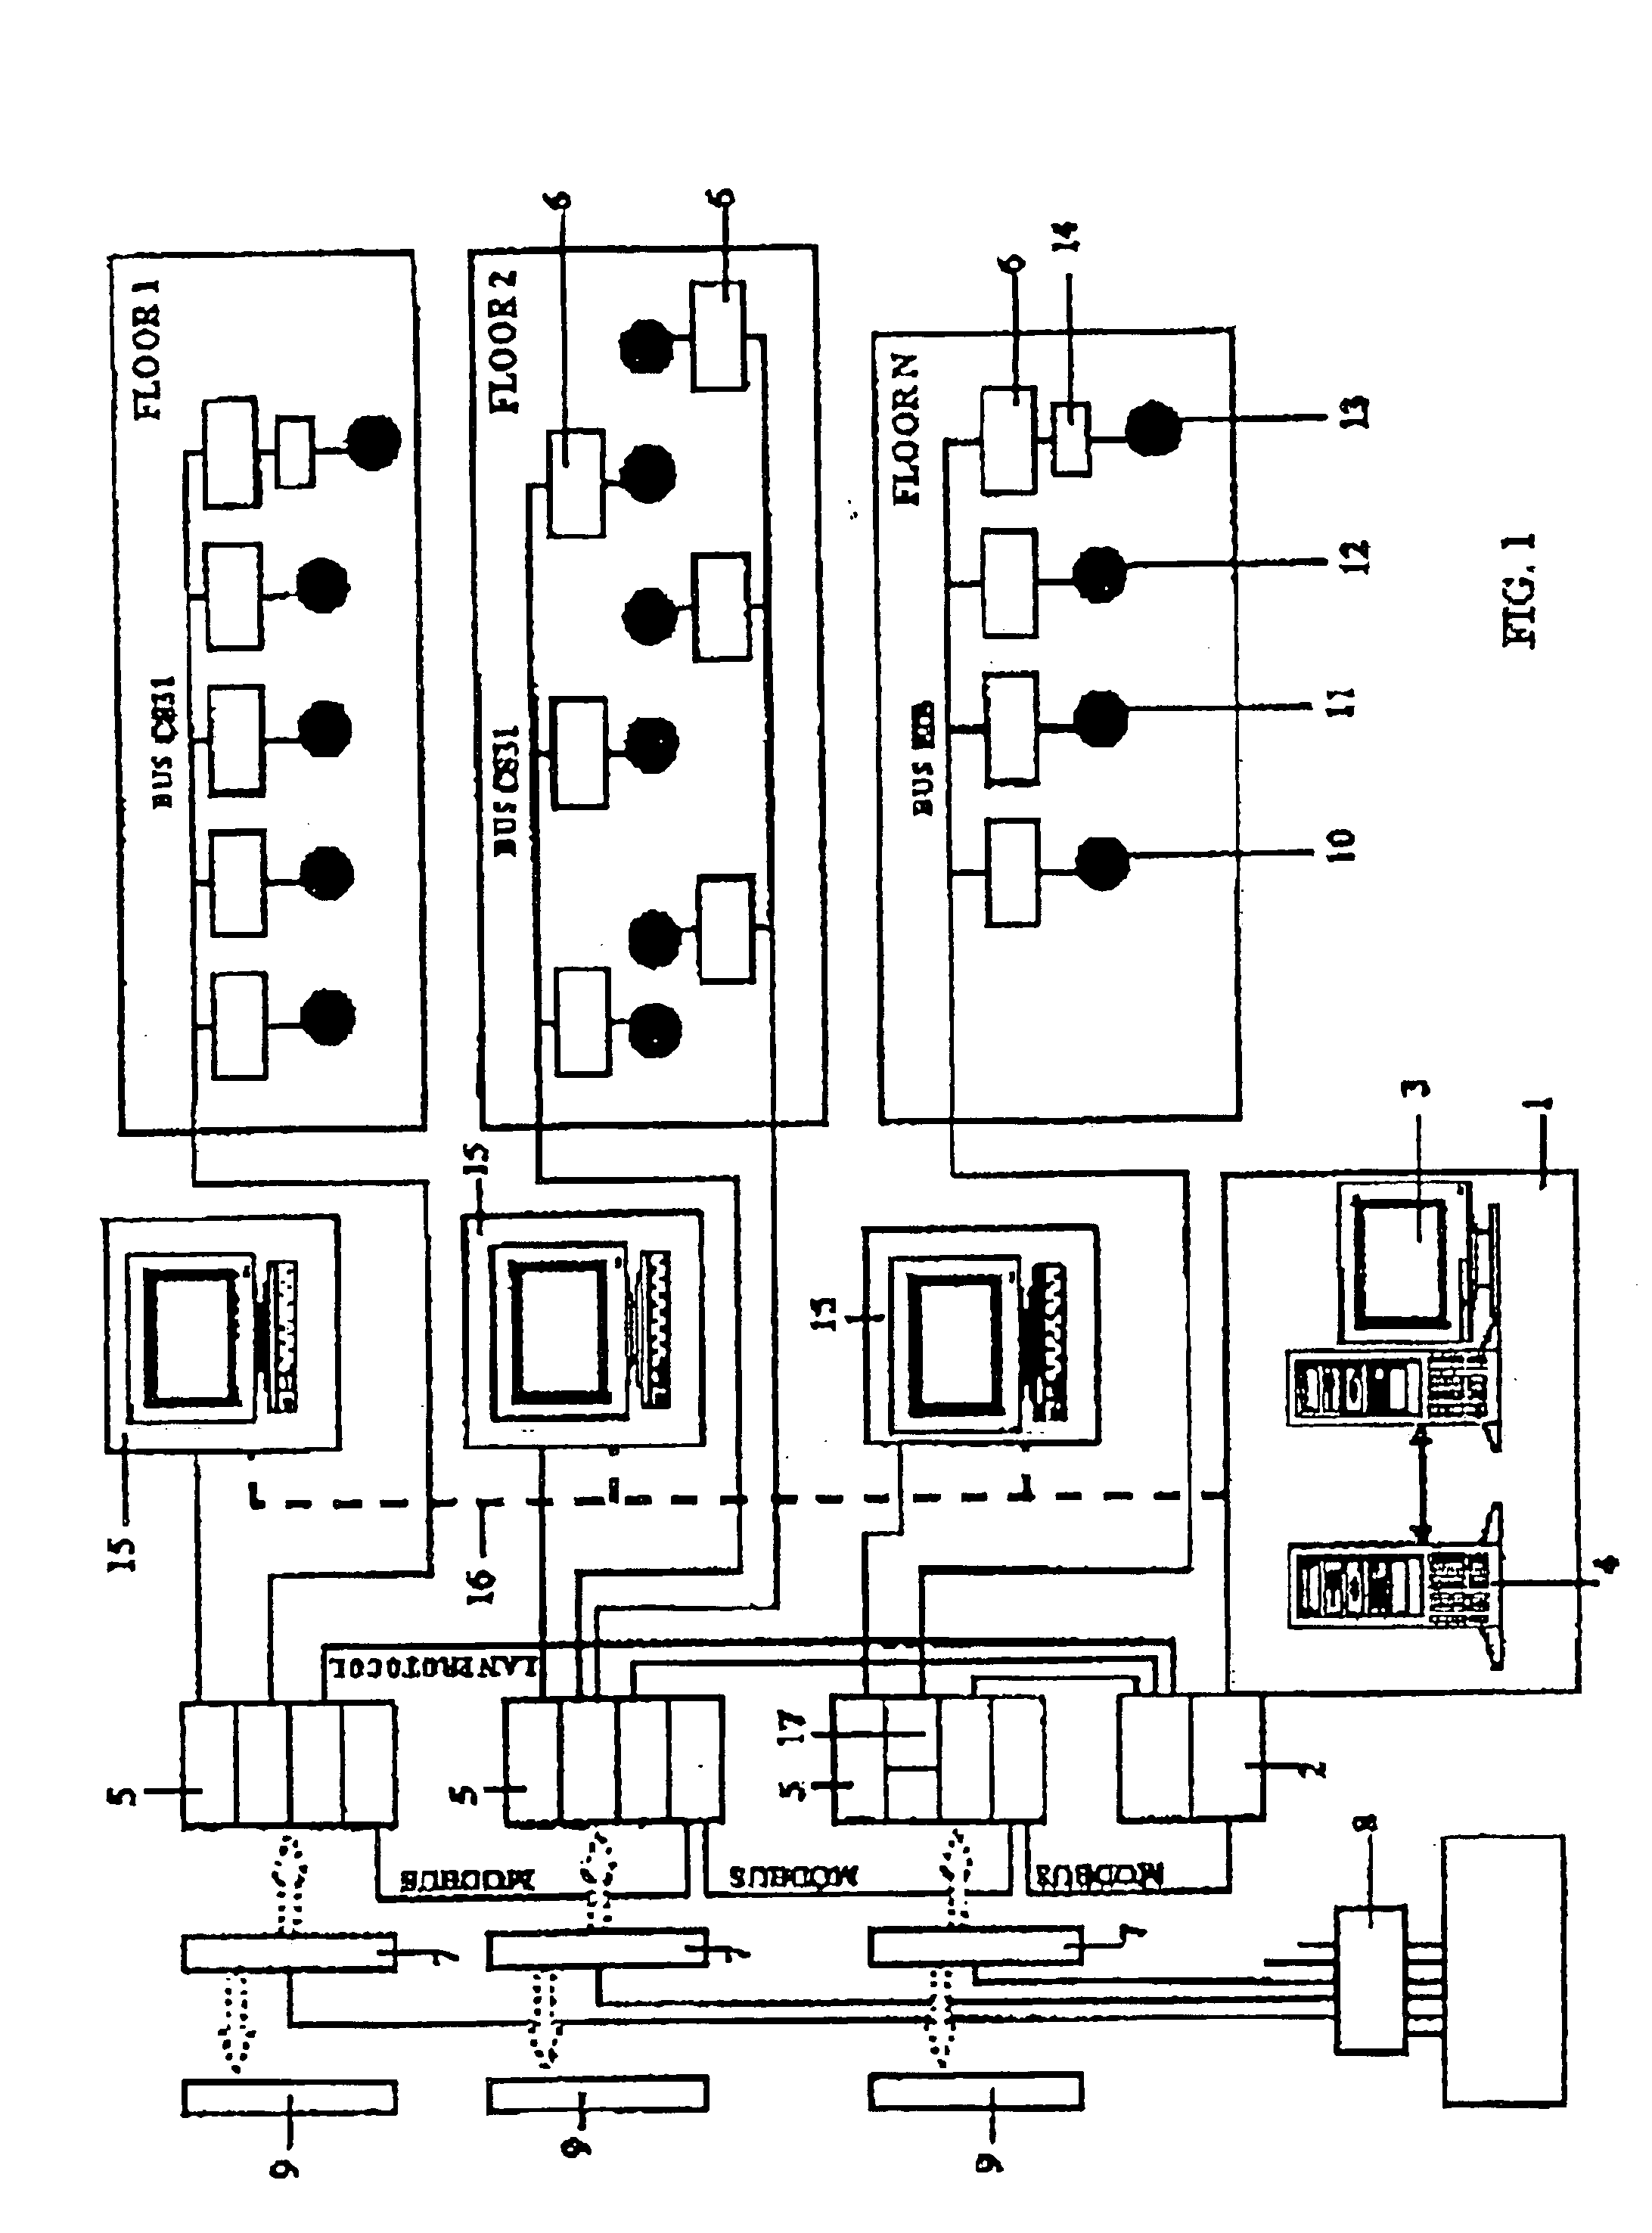 Structured system for monitoring and controlling the engineering equipment of an installation